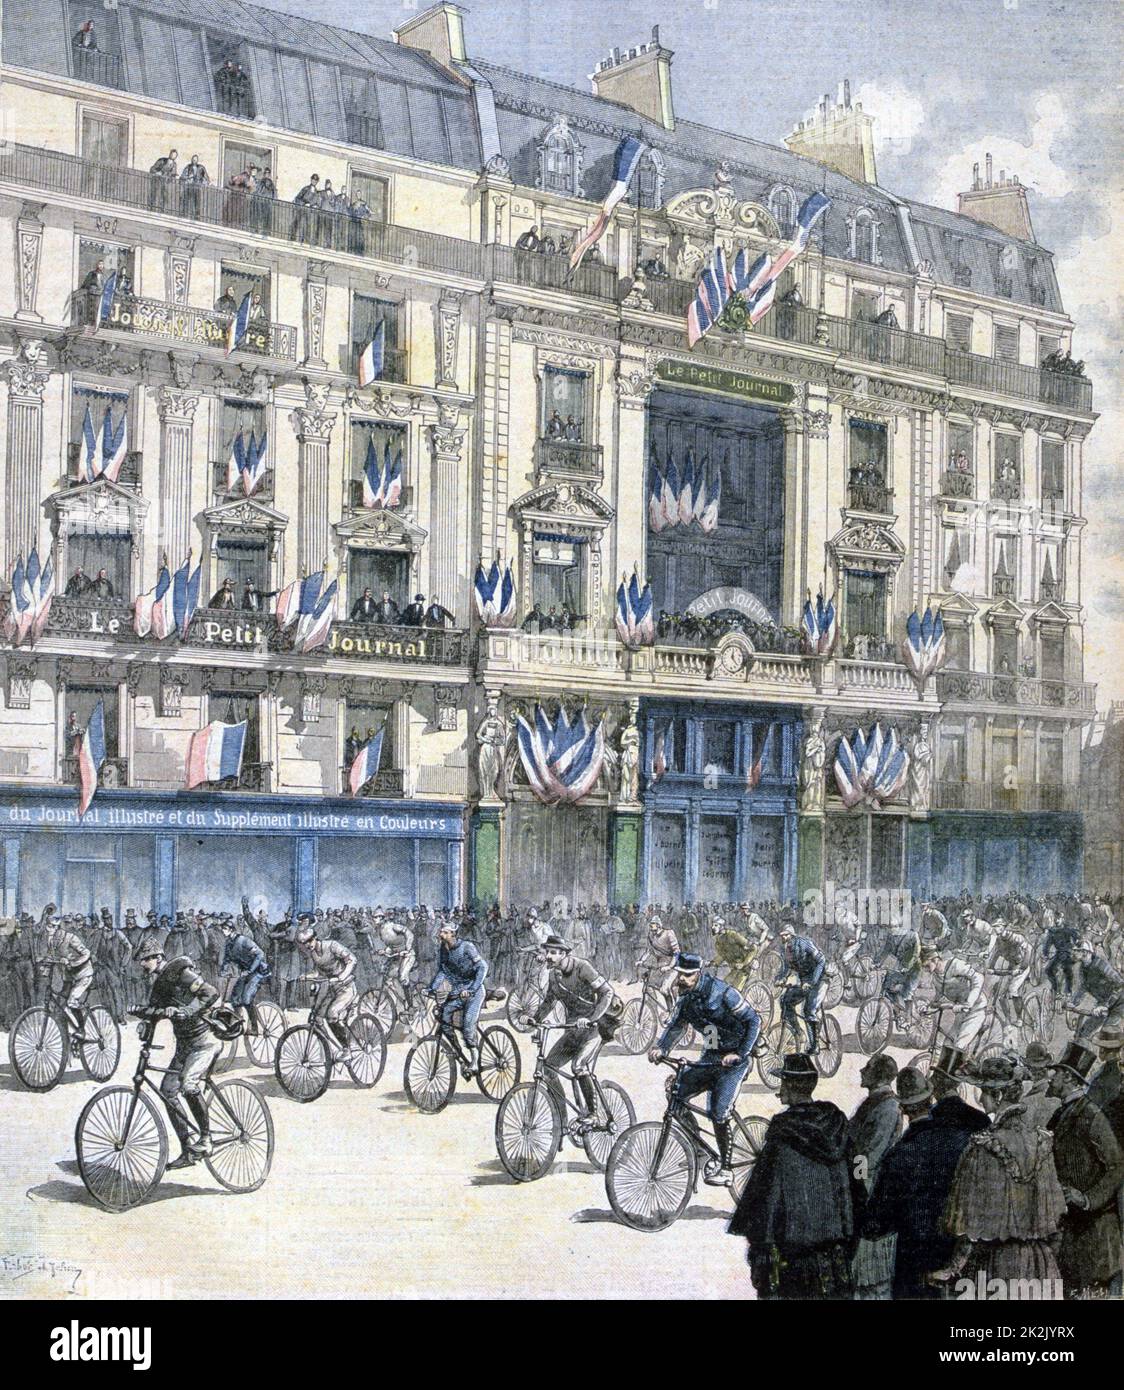 Start of the Paris-Brest-Paris bicycle race from Rue Lafayette on the morning of 6 September.  The 1,185 km (635 miles) had to be completed on a single machine. From 'Le Petit Journal', Paris, 12 September 1891. Stock Photo